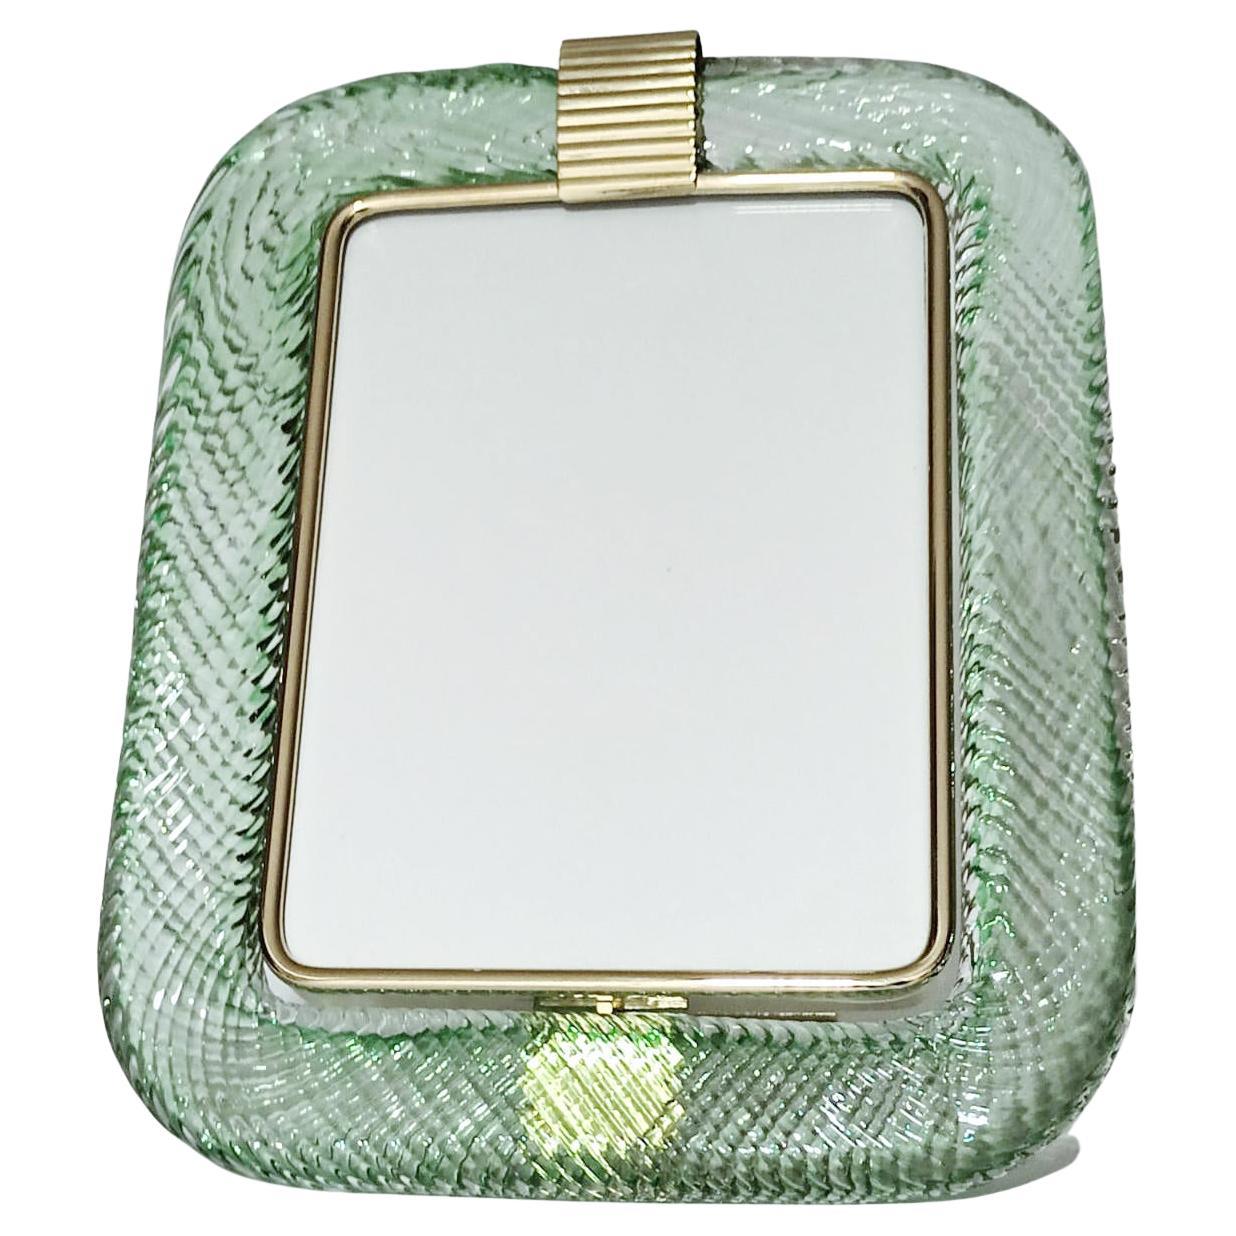 Murano Green Photo Frame by Barovier e Toso - 3 Available For Sale